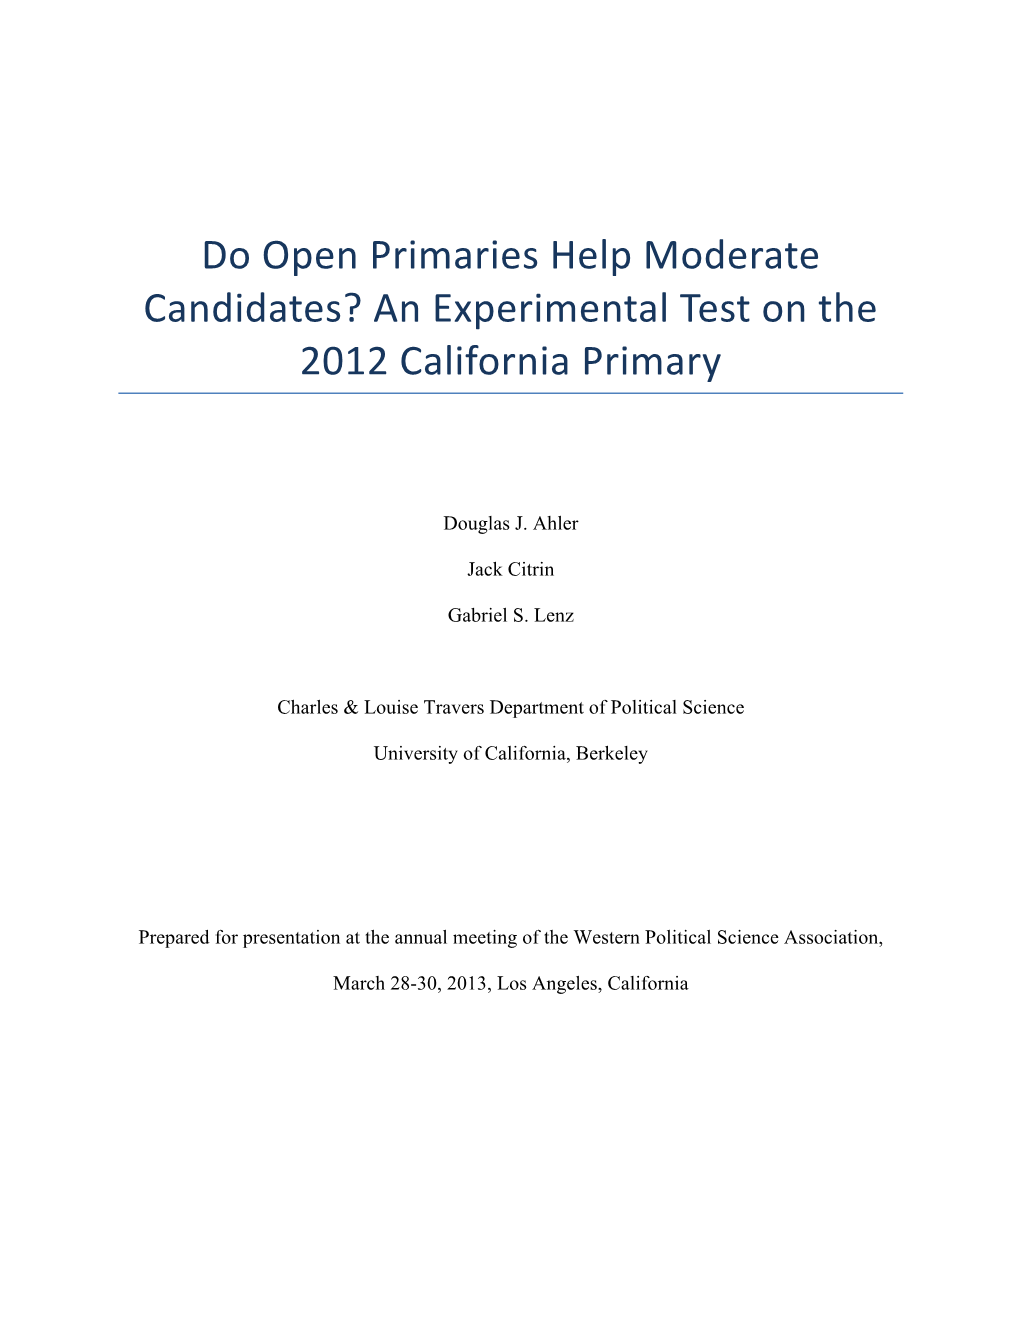 Do Open Primaries Help Moderate Candidates? an Experimental Test on the 2012 California Primary